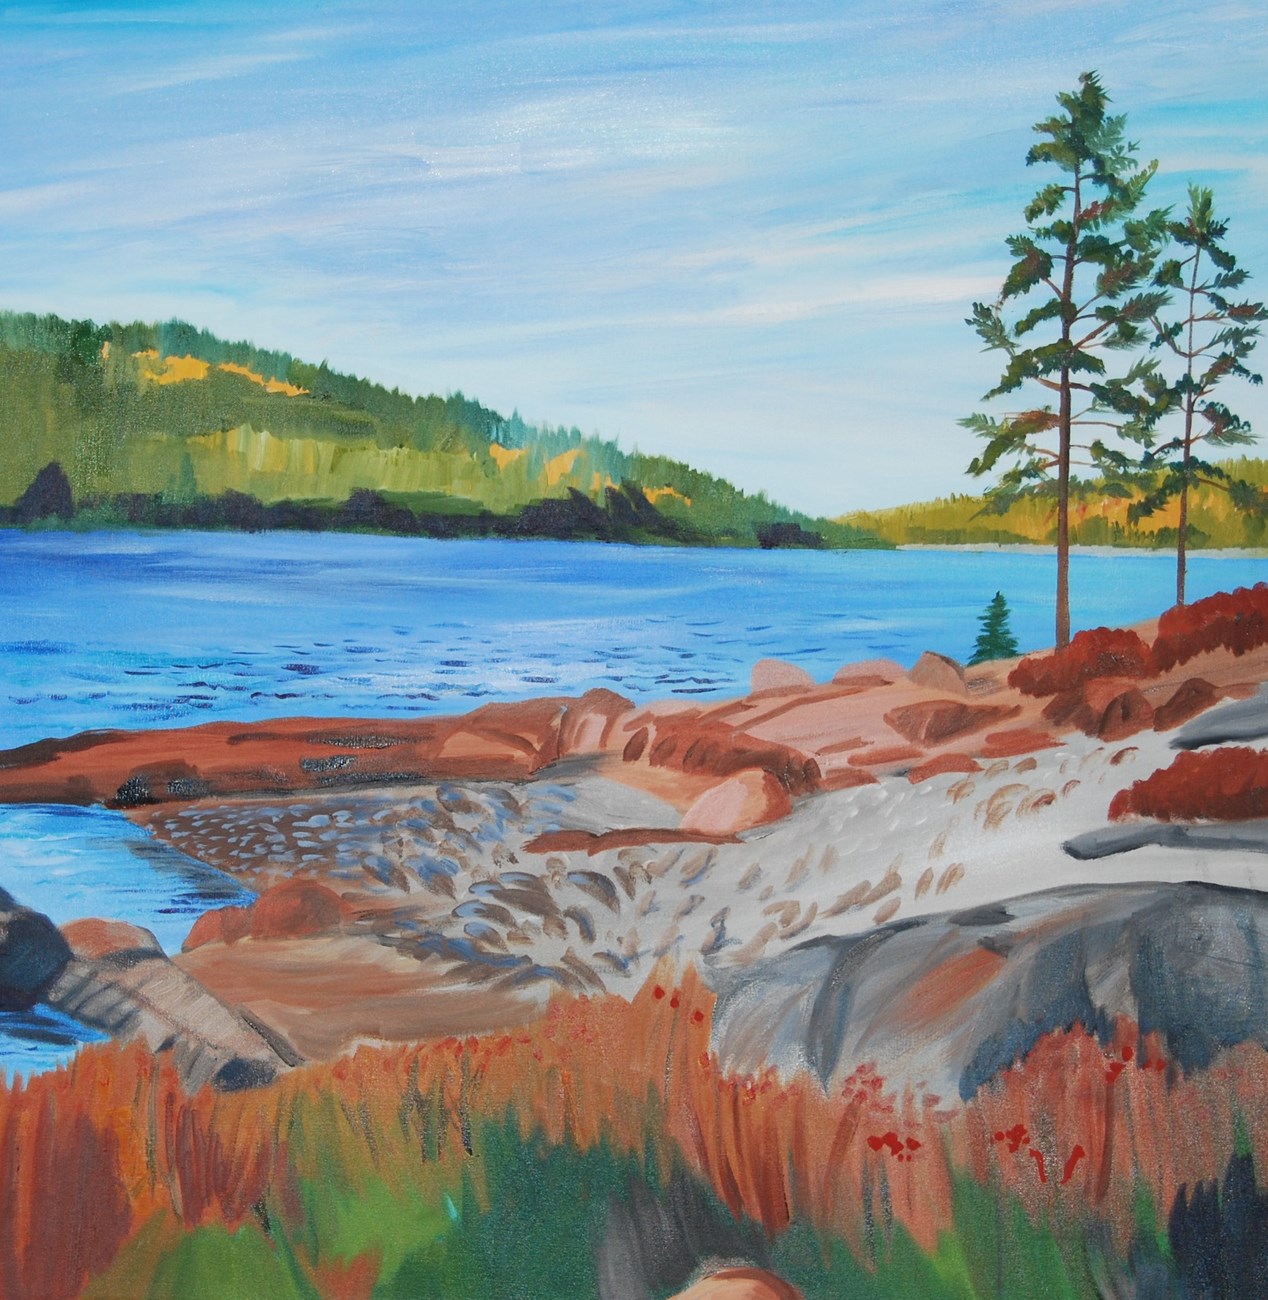 Oil painting of coastline along the Schoodic Peninsula. Sunny day with brown foreground and light blue water. Oil painting on canvas